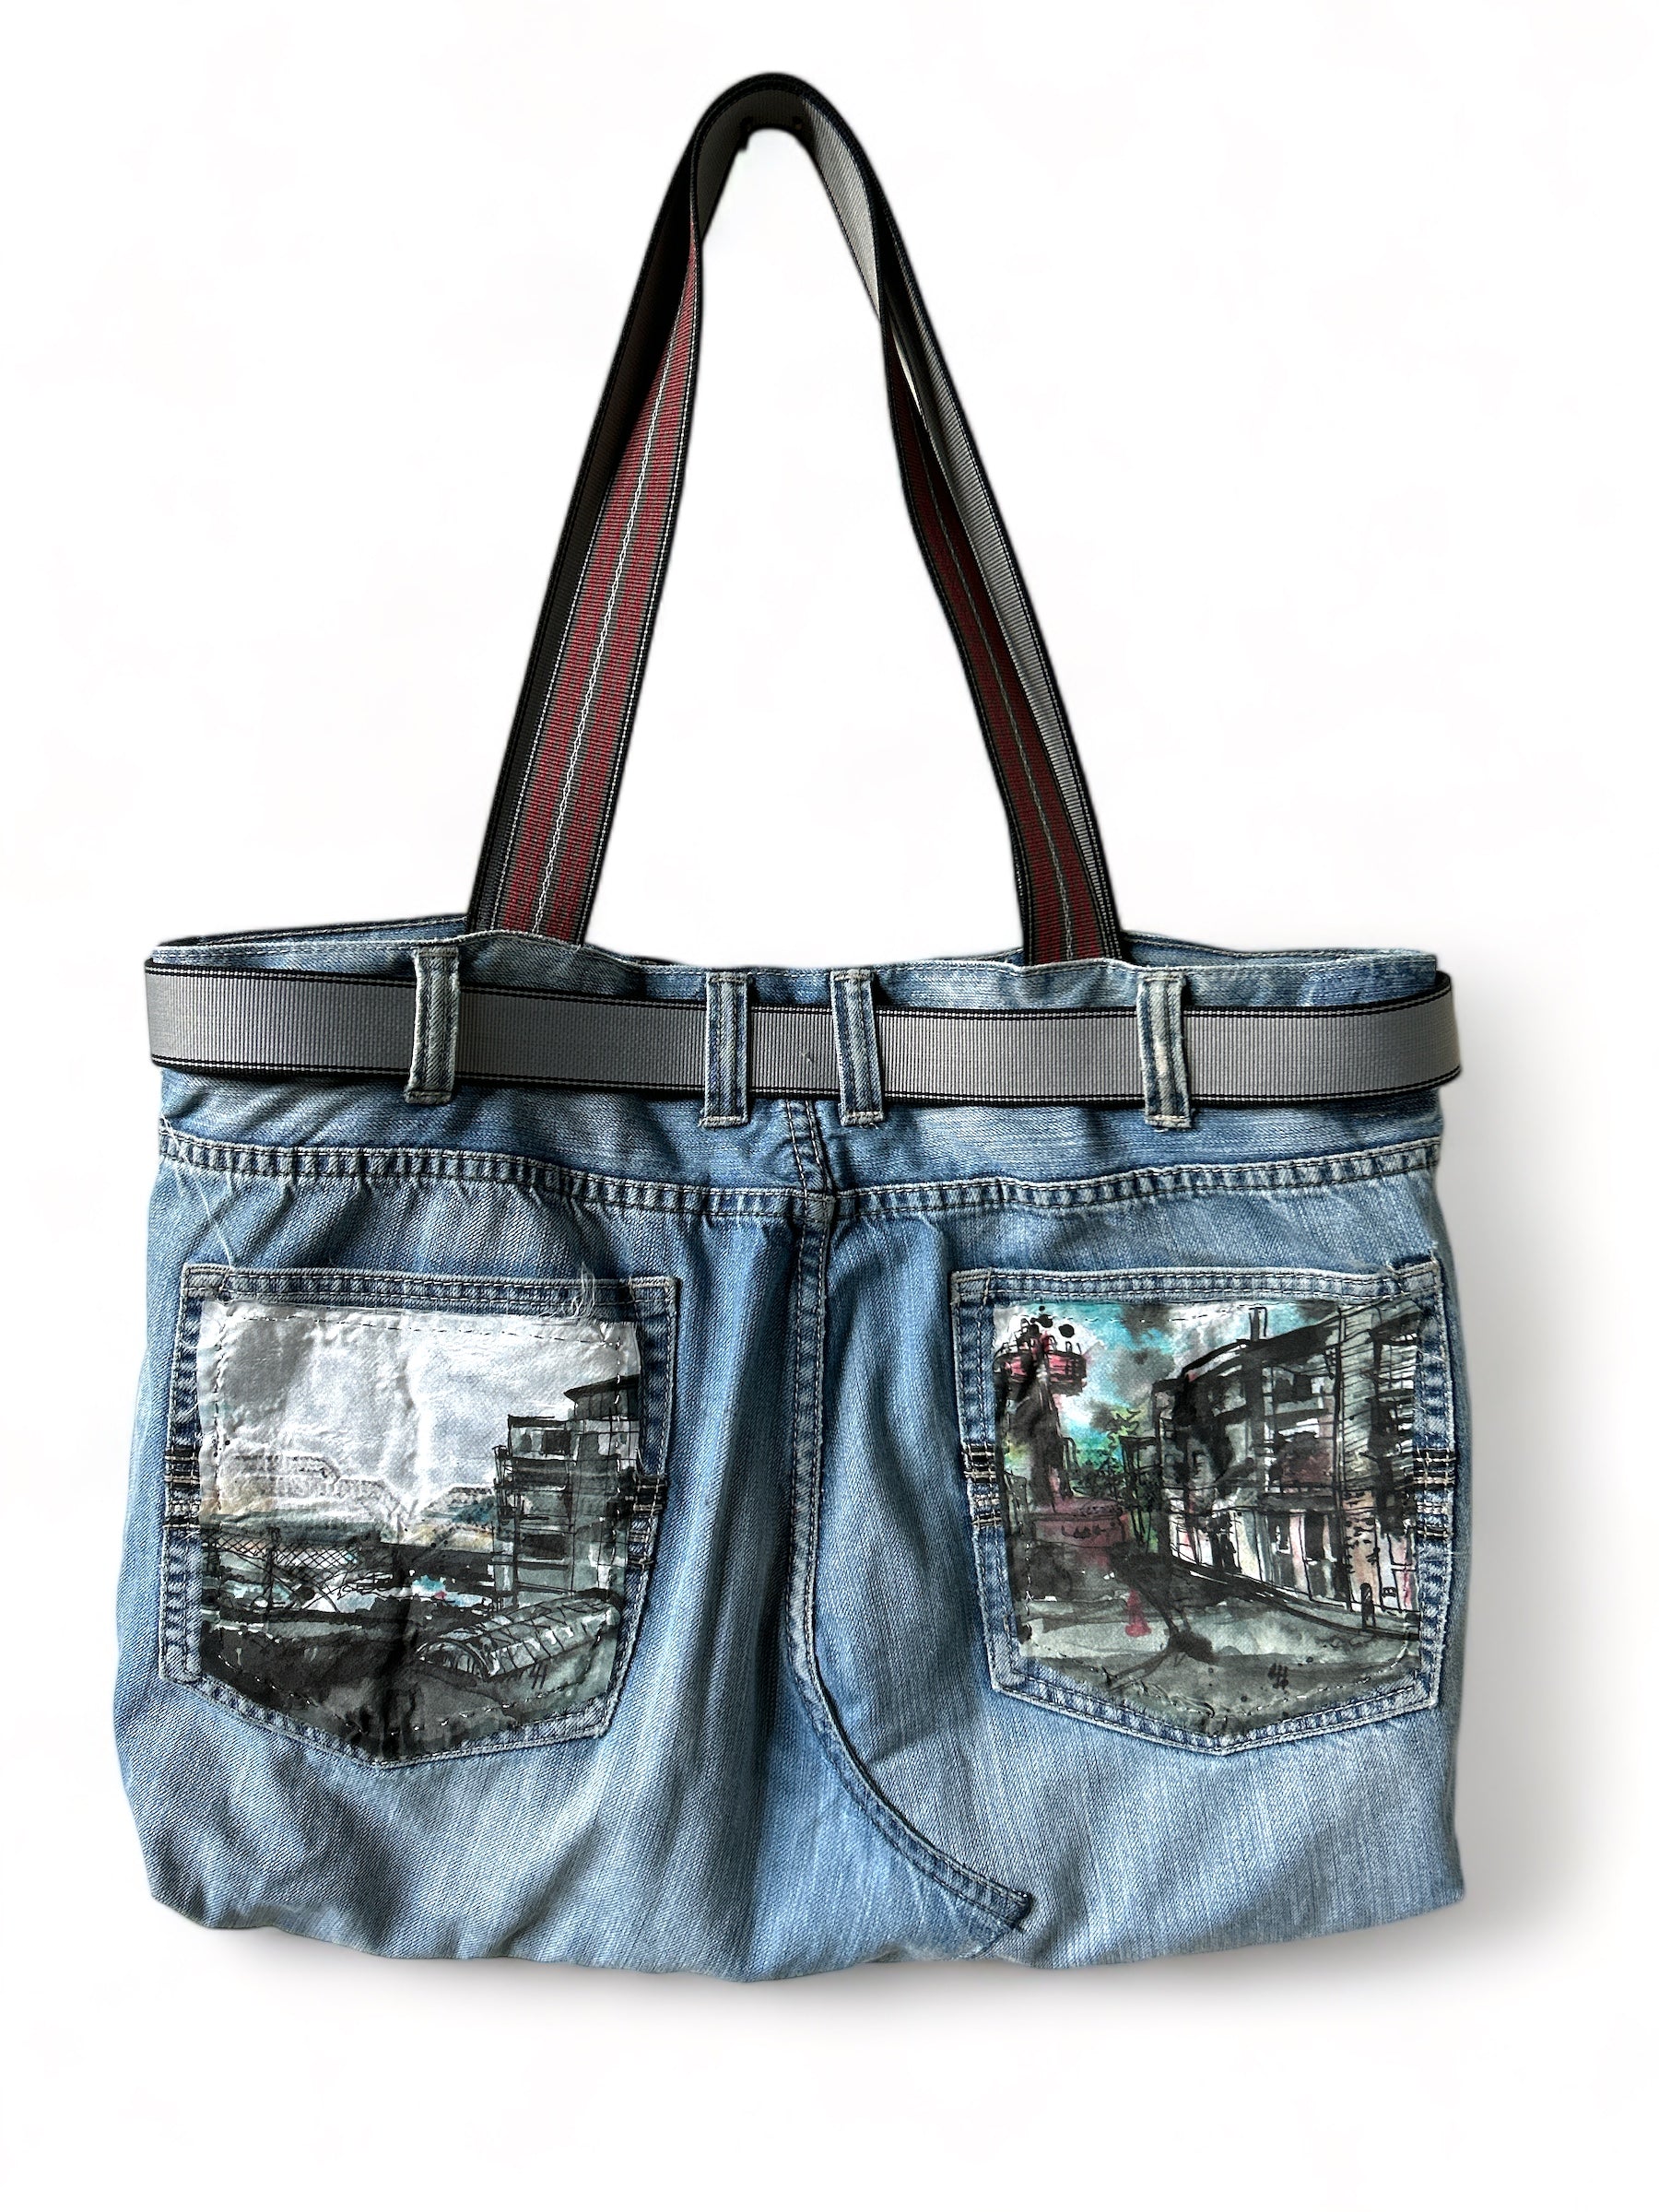 Tote Bag-CML TOTE - "Postcards from Elsewhere"-WOOLTRIBE